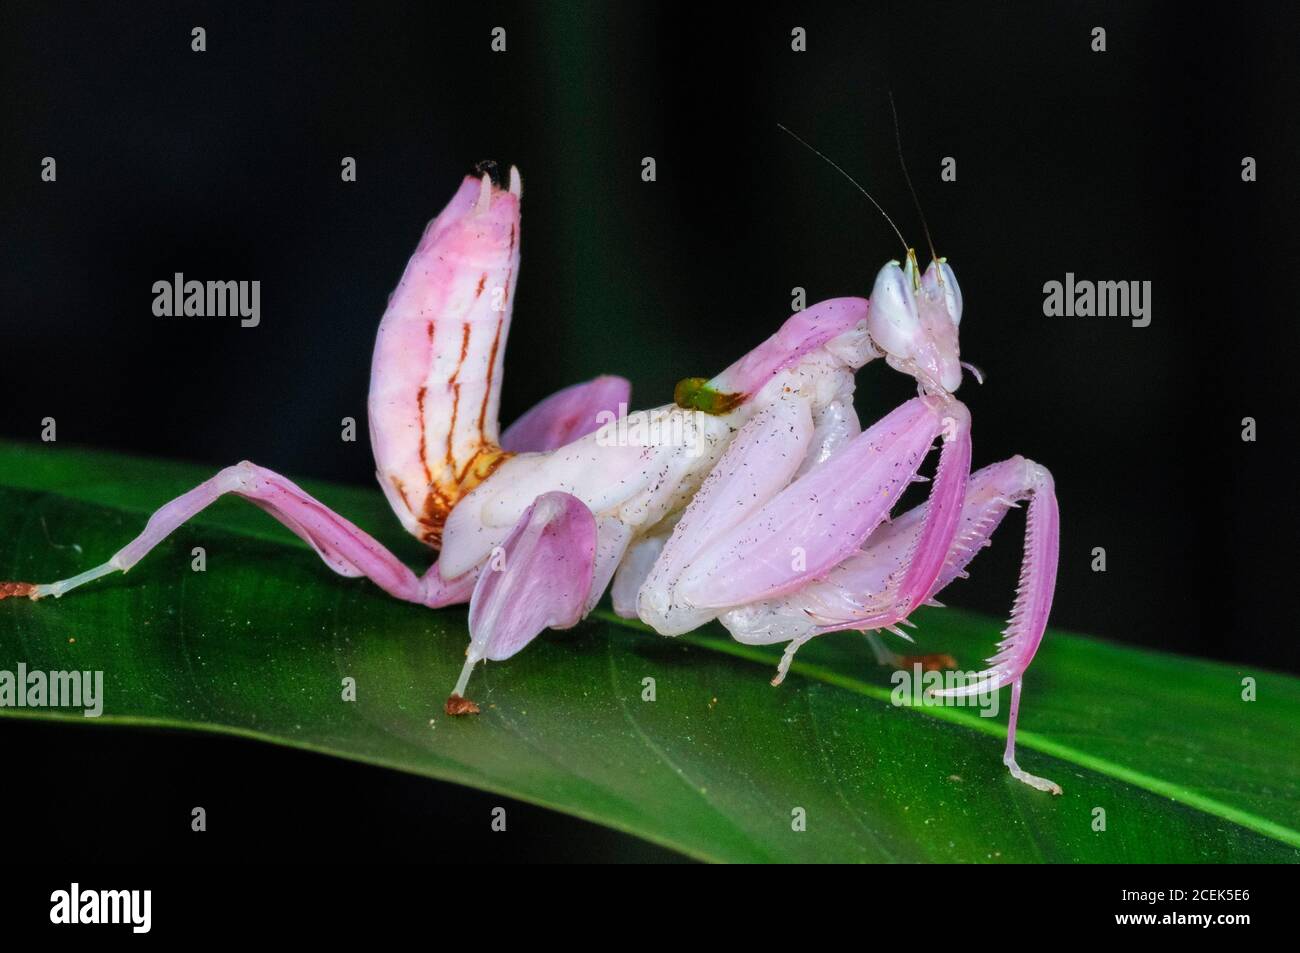 Pink Orchid Mantis Malaysian Orchid Mantis Hymenopus Coronatus Or Hymenopus Bicornis A Flower Mantis A Praying Mantis Which Mimics To Perfection Stock Photo Alamy,Red Fox Pet Price